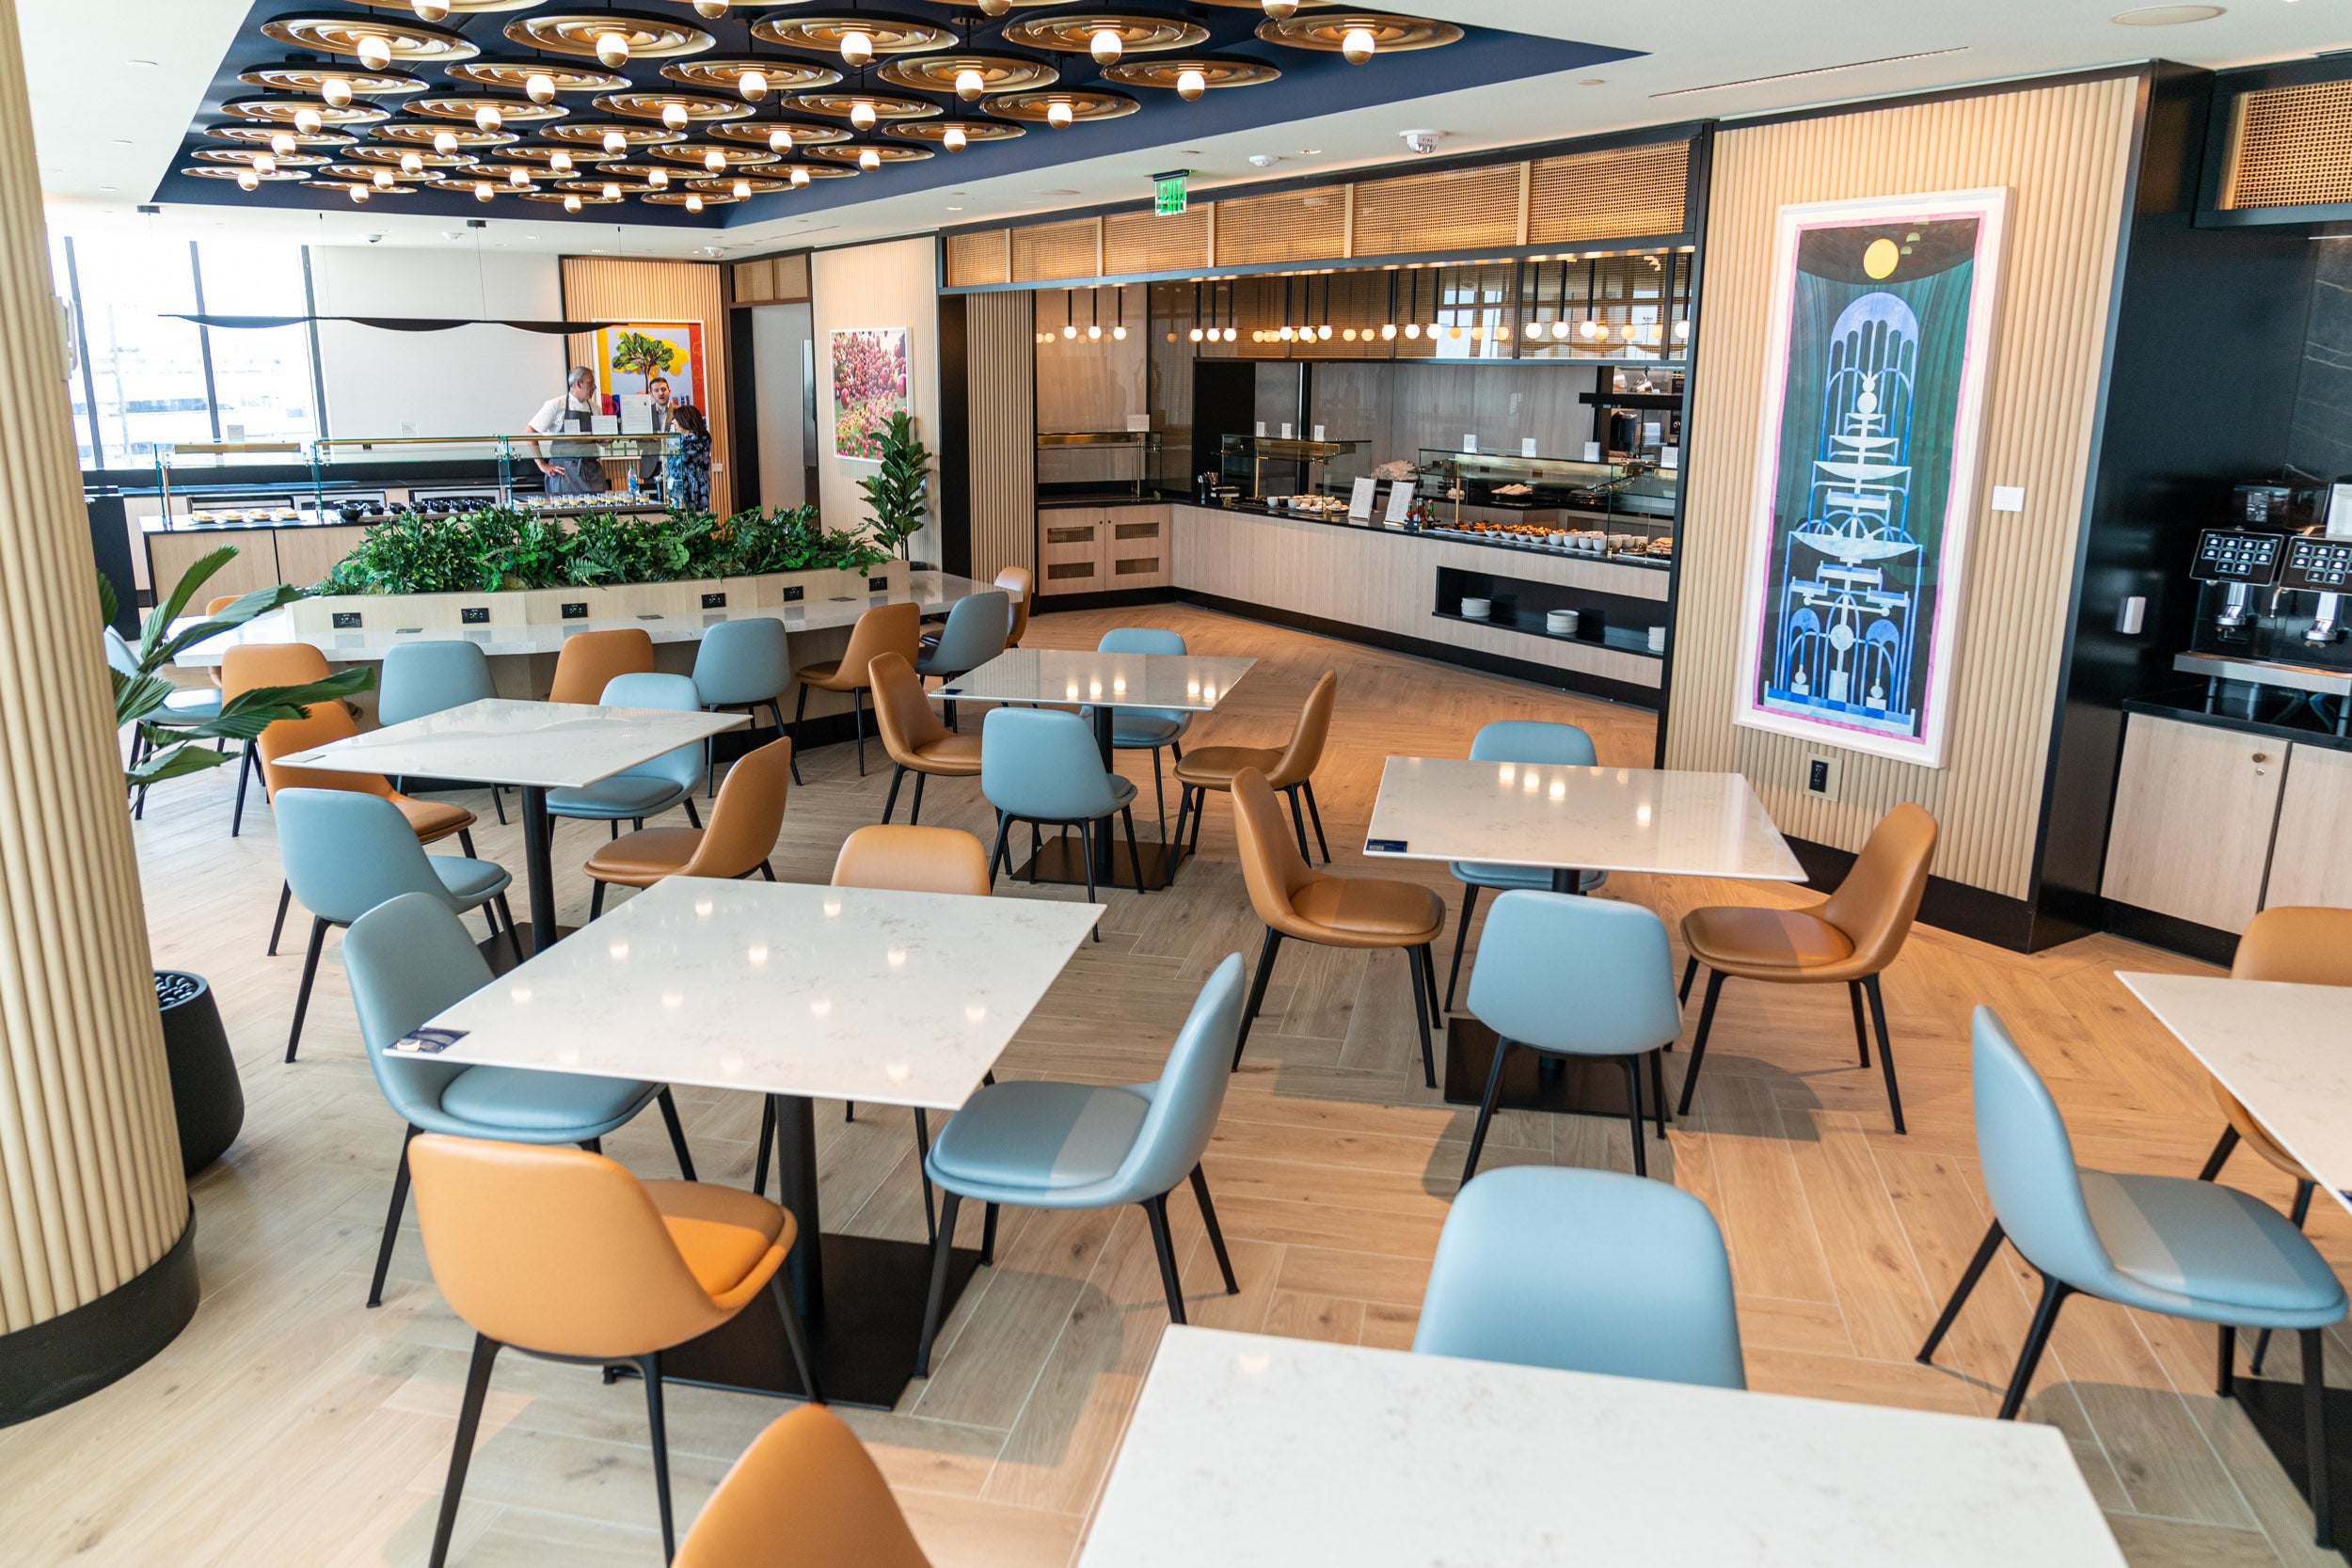 Chase's splashy Sapphire Lounge is opening in Boston — here's a first look - The Points Guy